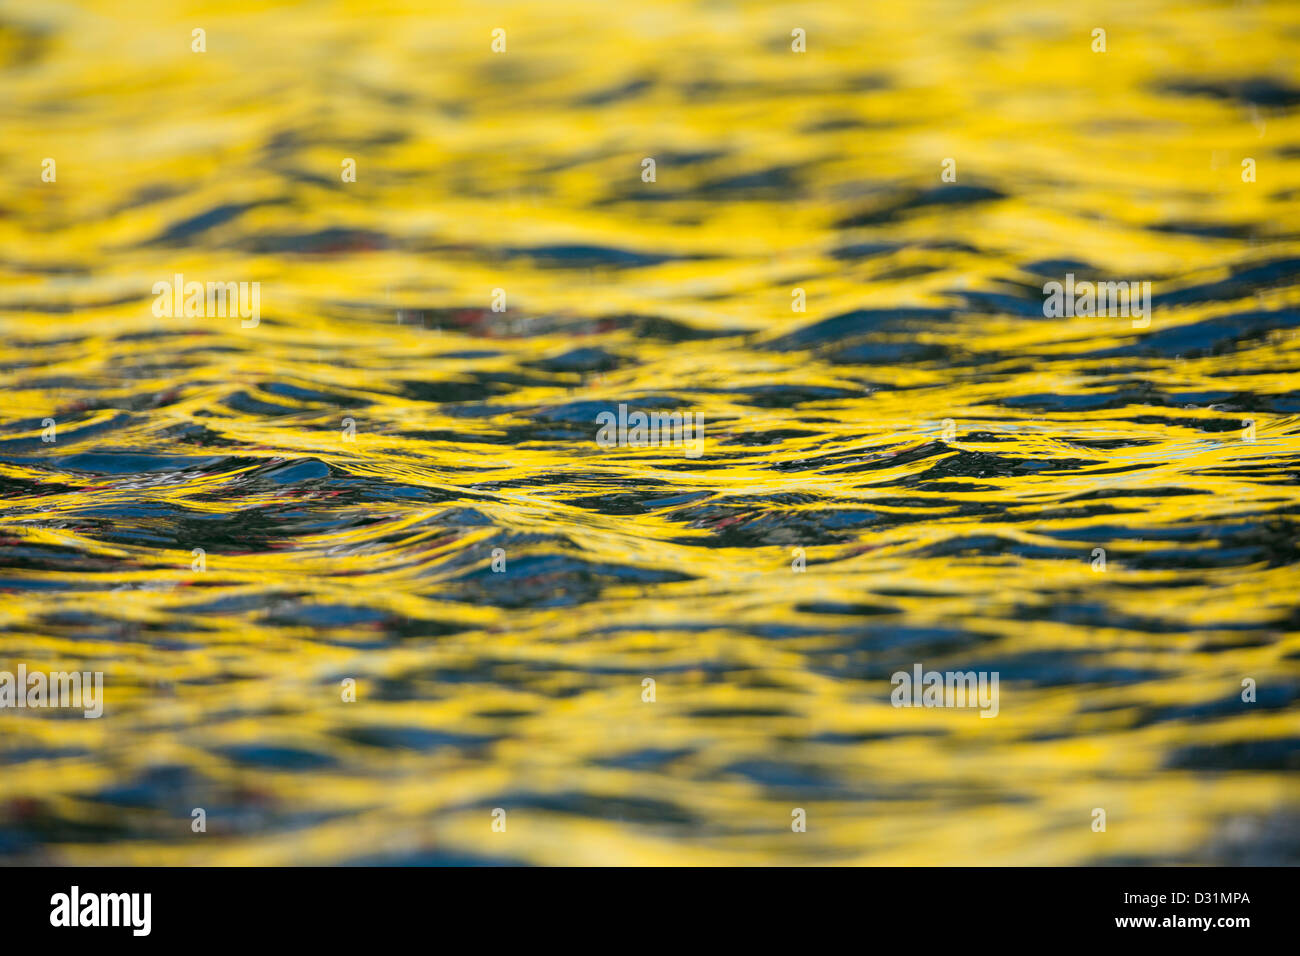 Yellow Pattern on the Sea; Newlyn; Cornwall; Colour Reflection from Boat; Stock Photo